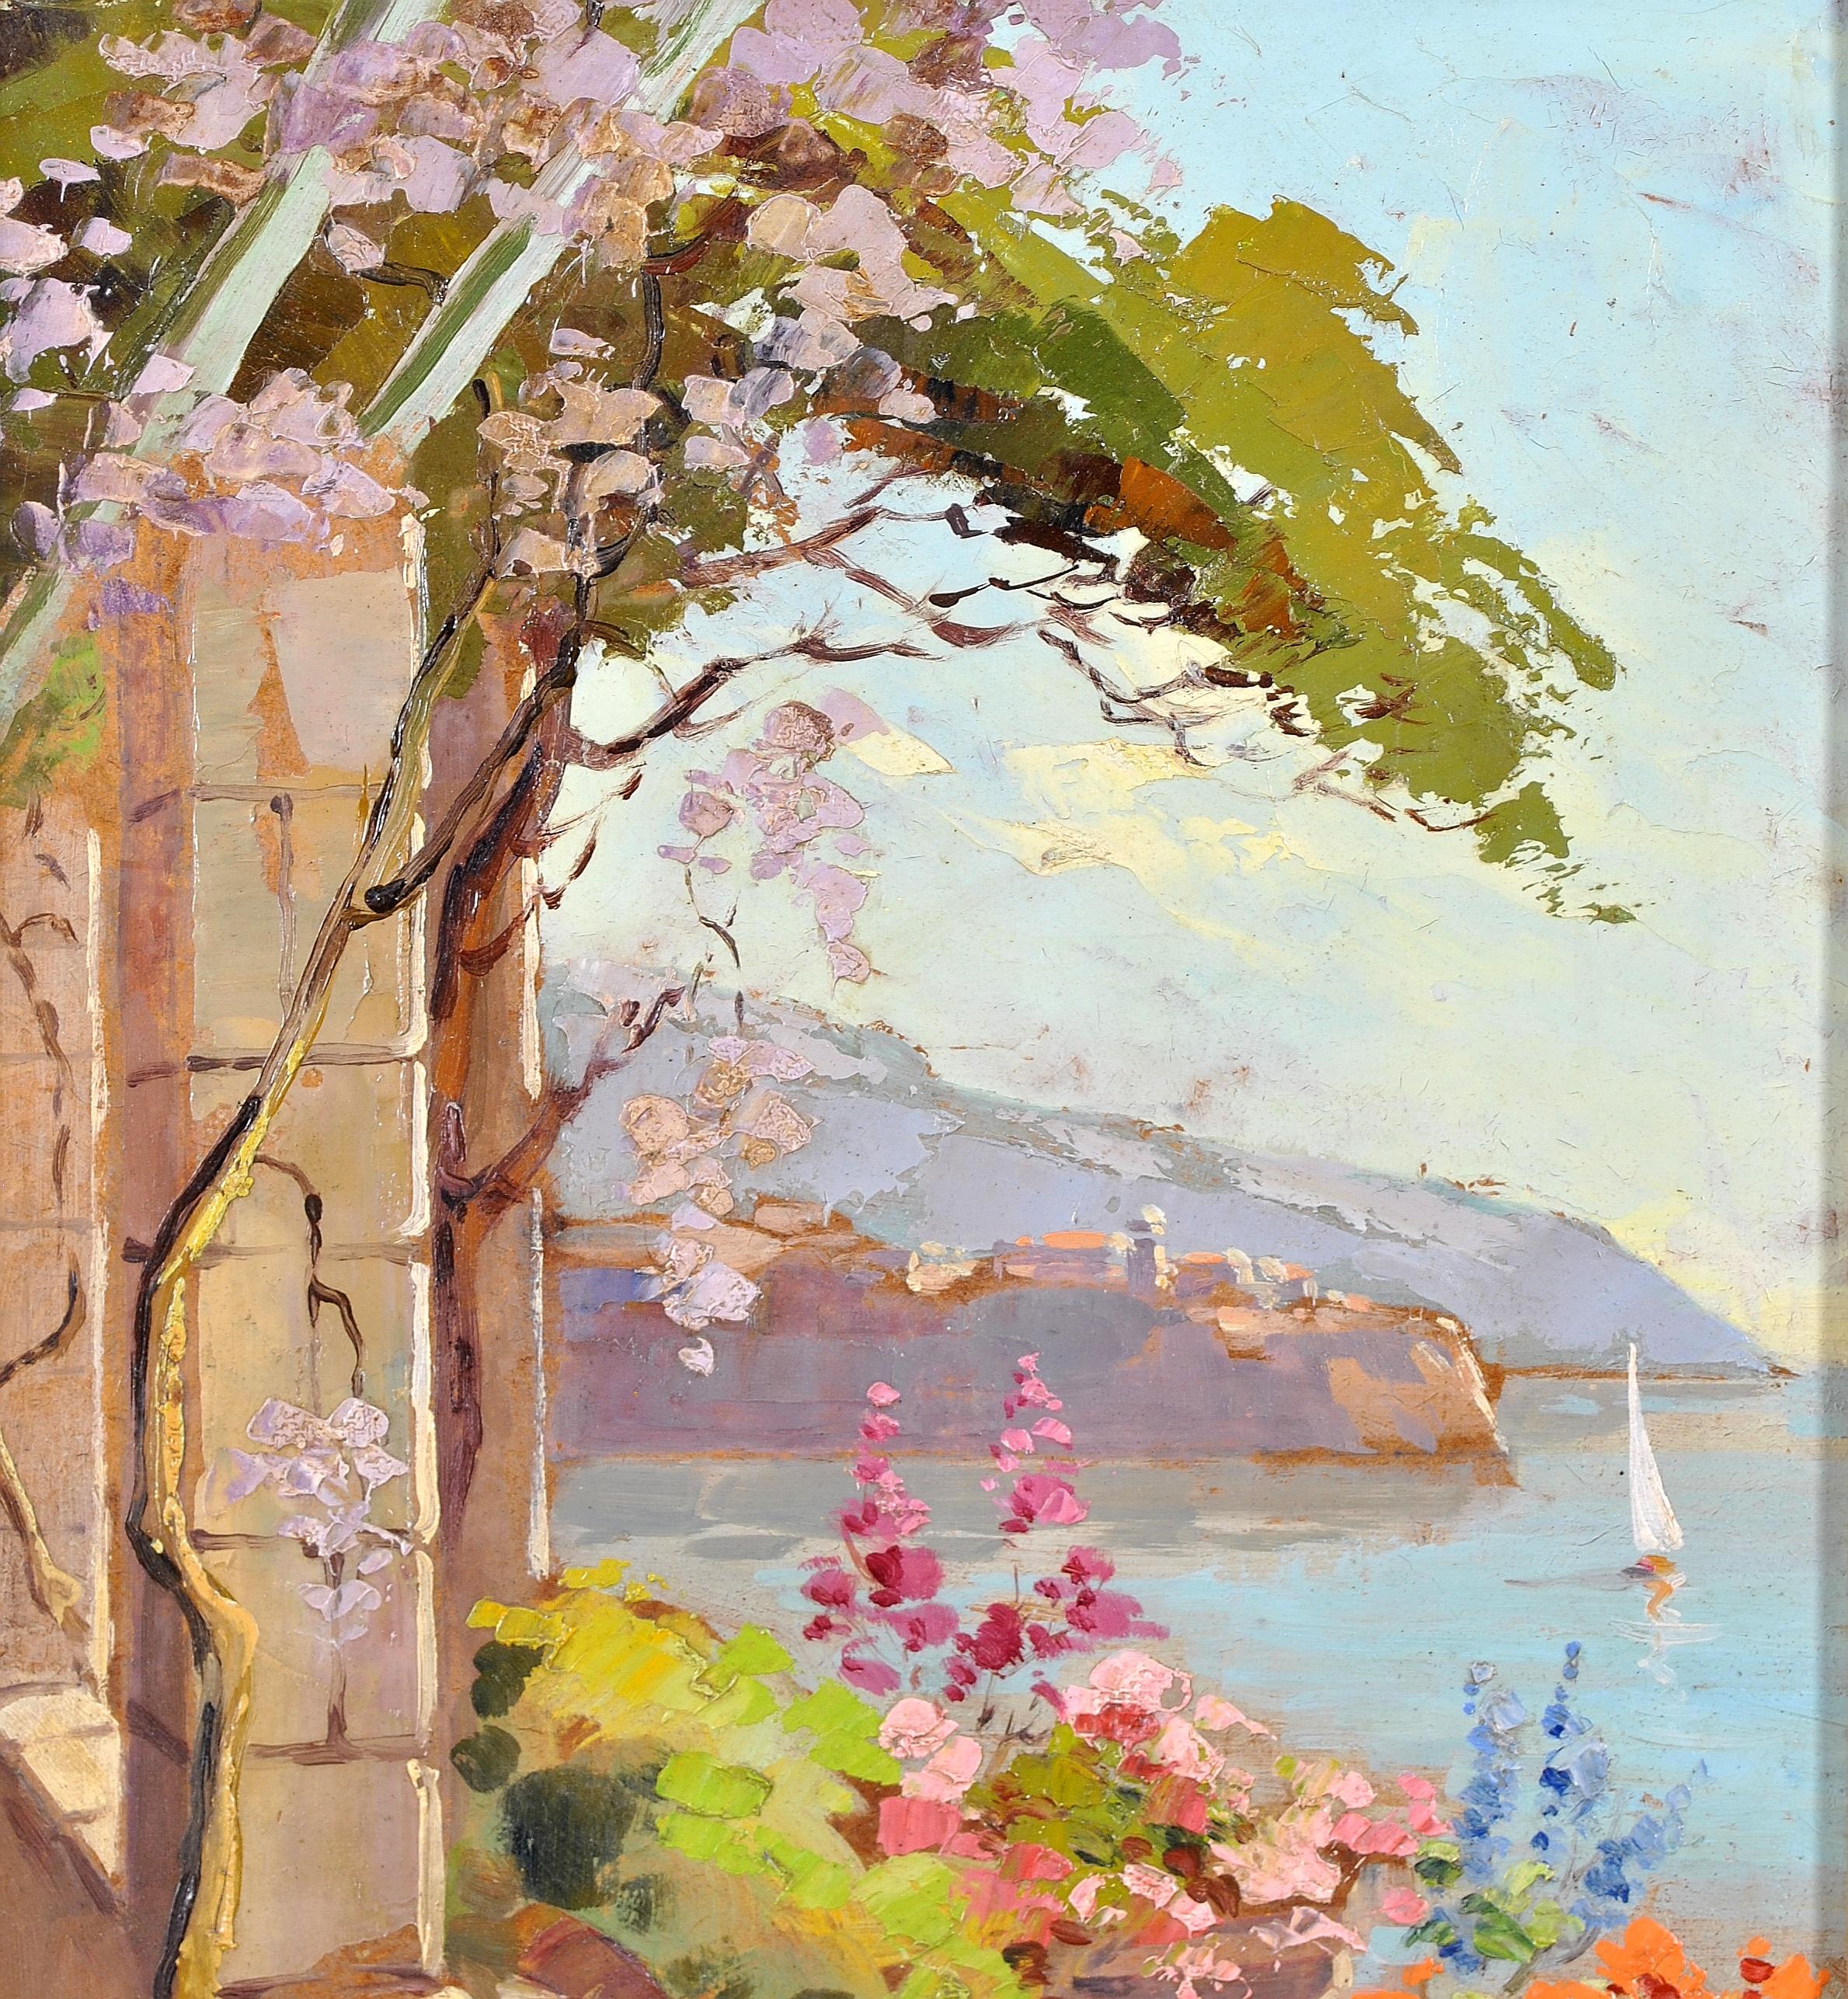 A beautiful c.1950 oil on board by French artist Lucien Potronat depicting a view of the Cote d'Azur / French Riviera from a balcony. Excellent quality work painted in muted tones with impressionist dabs of paint in the style of Claude Monet.

The